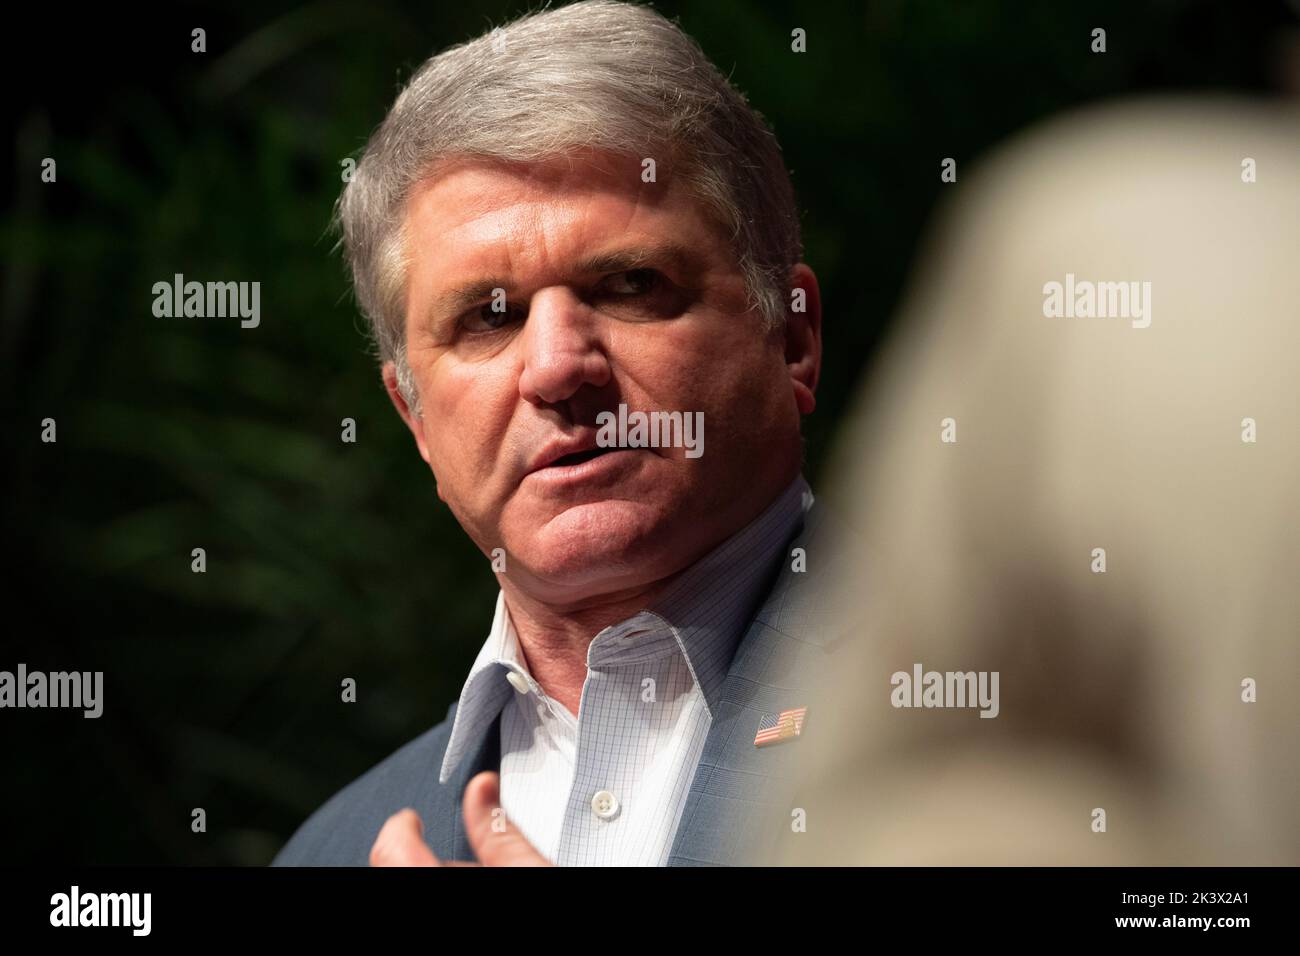 Texas Republican congressman MICHAEL MCCAUL speaks during an interview session at the annual Texas Tribune Festival in downtown Austin on September 24, 2022. McCaul, who represents Texas' 10th District, is on the Foreign Affairs Committee. Stock Photo